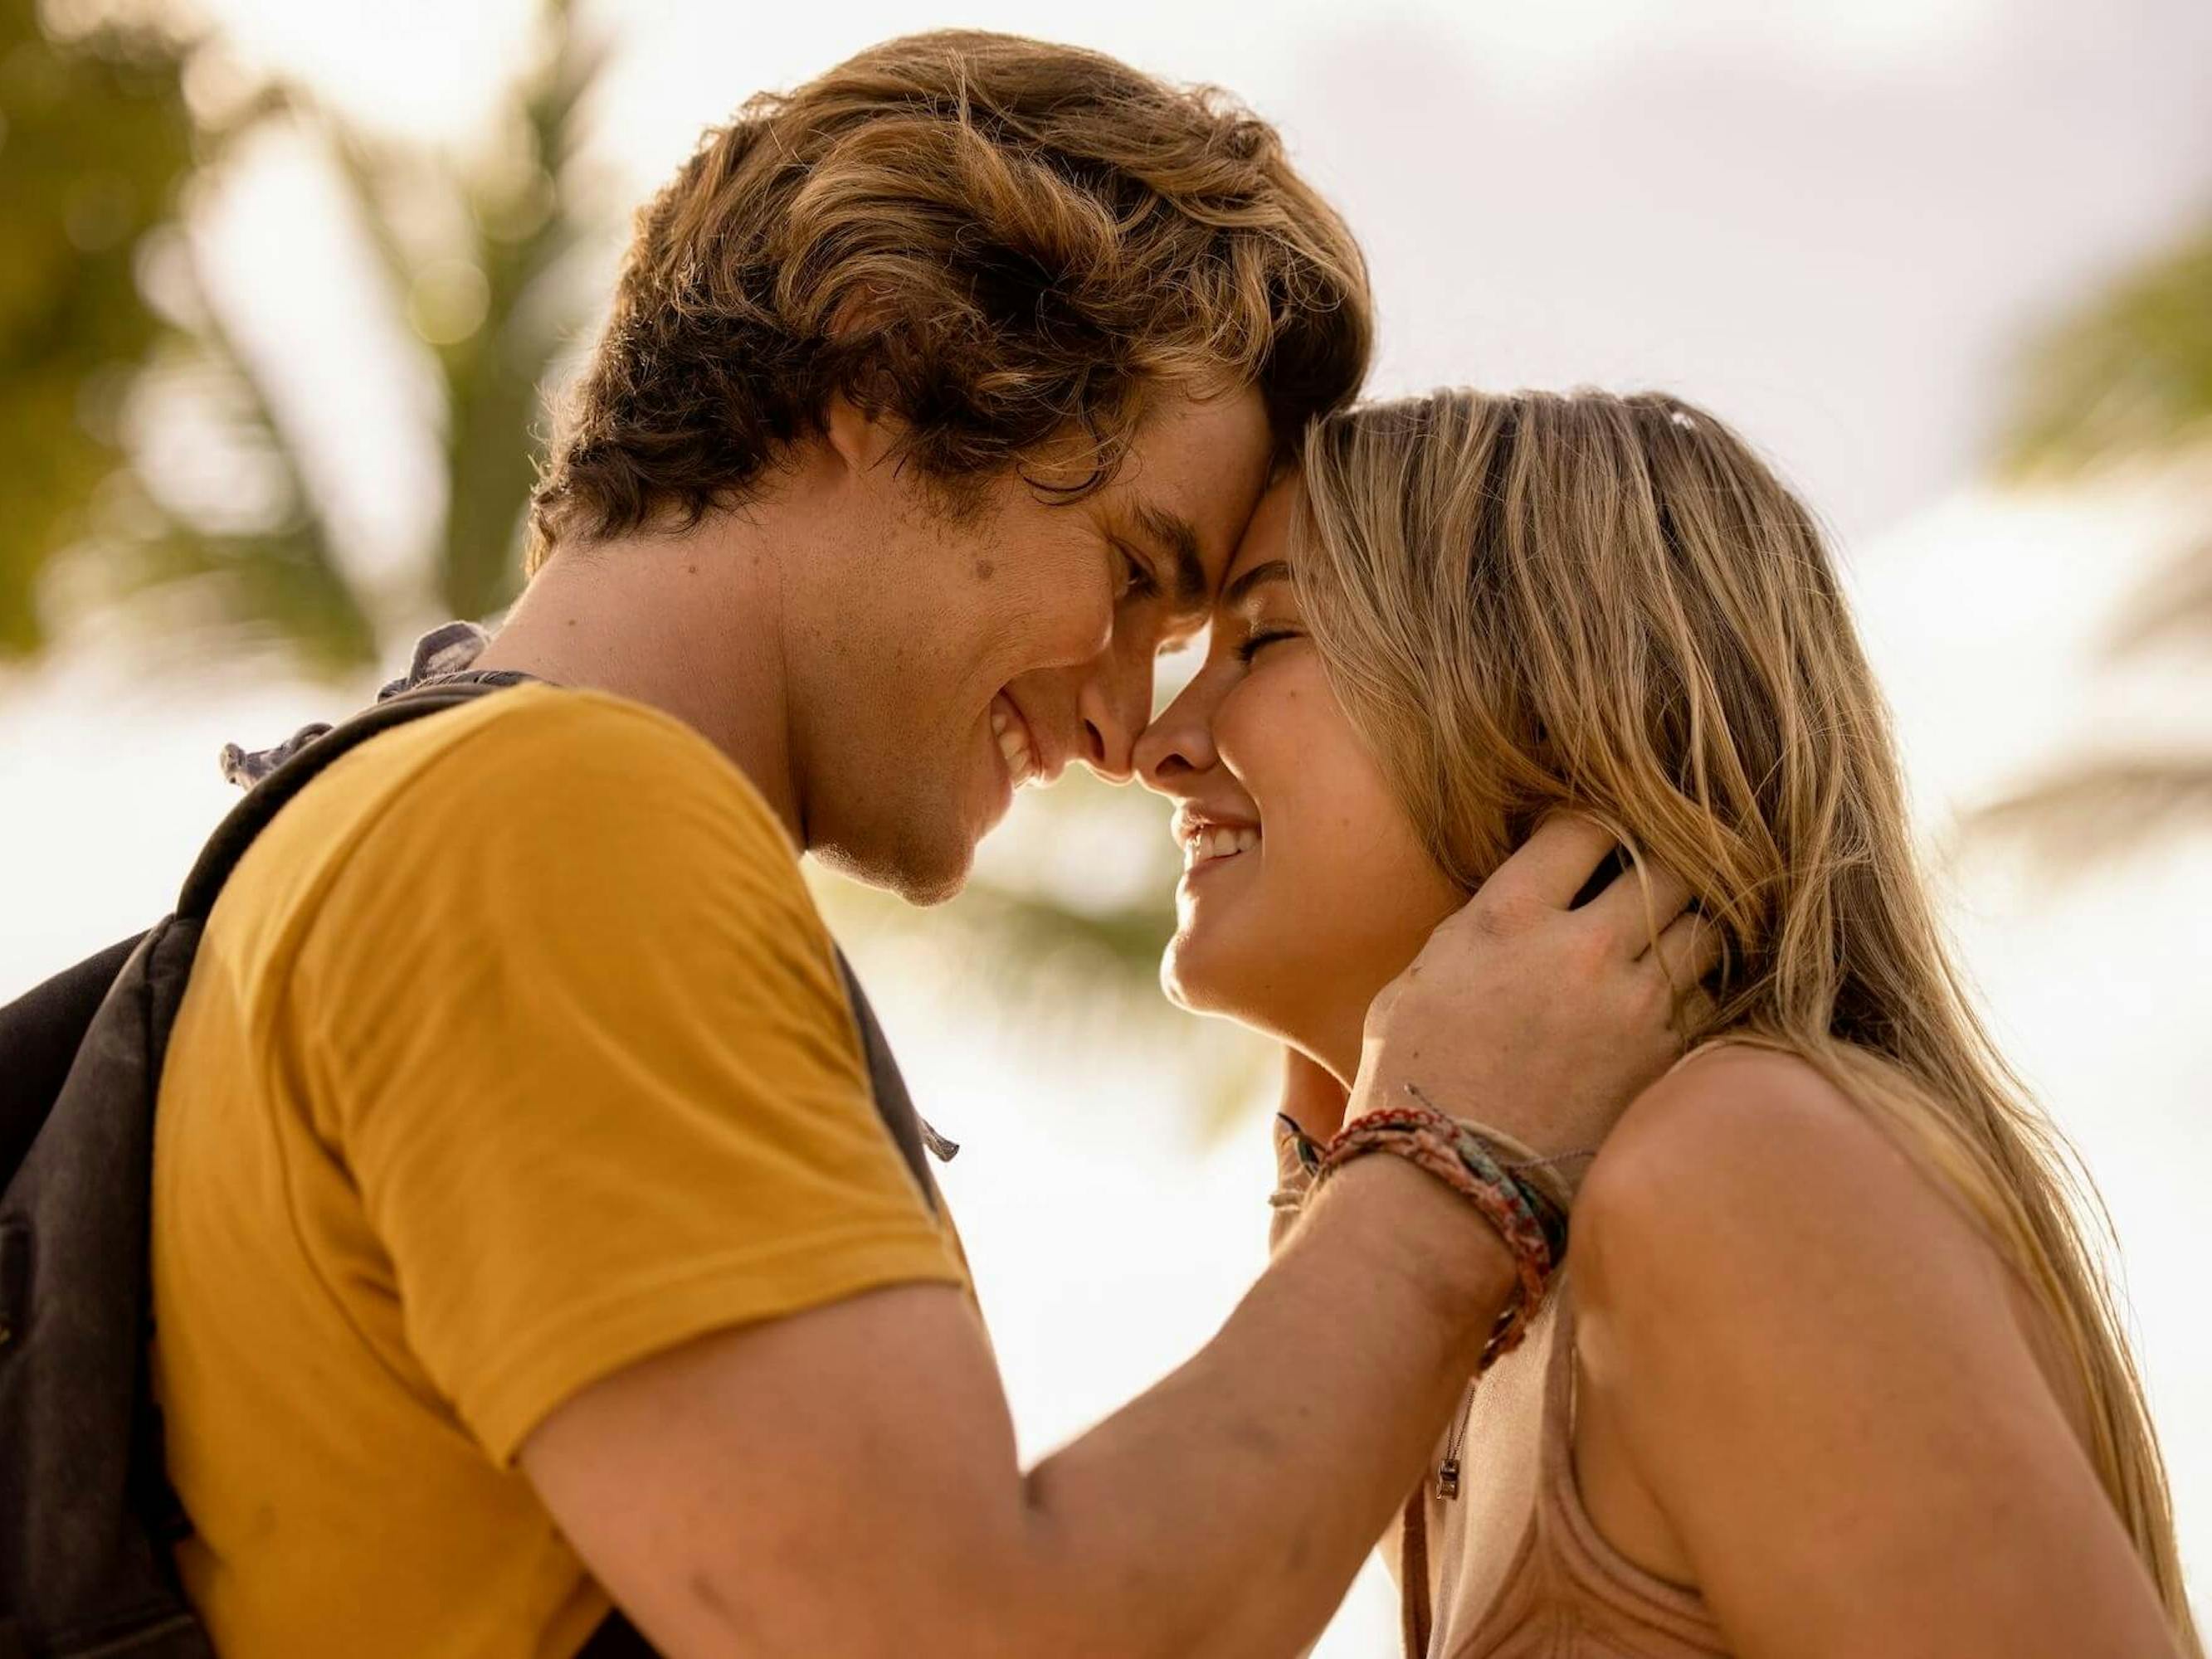 John B (Chase Stokes) and Sarah Cameron (Madelyn Cline) in Outer Banks. Chase wears a yellow t-shirt and Madelyn wears a tan tank top. They embrace with their foreheads and noses touching.